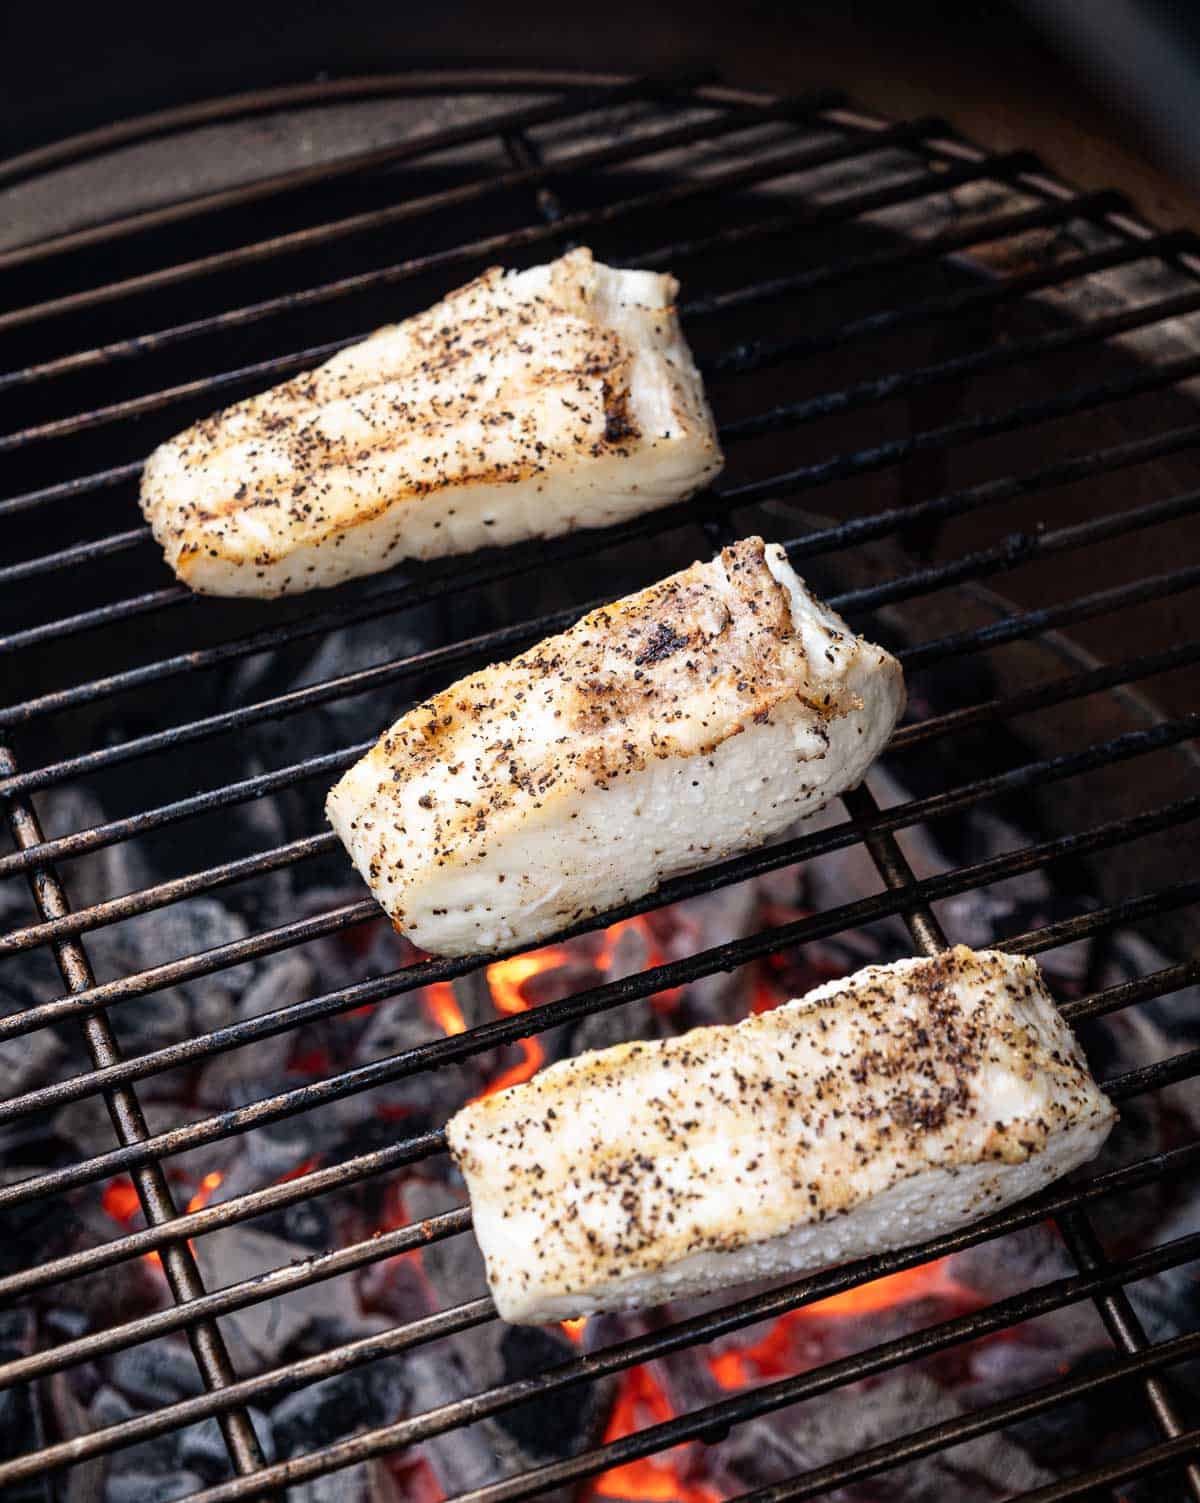 Halibut on the grill over direct heat after it has been flipped over once.